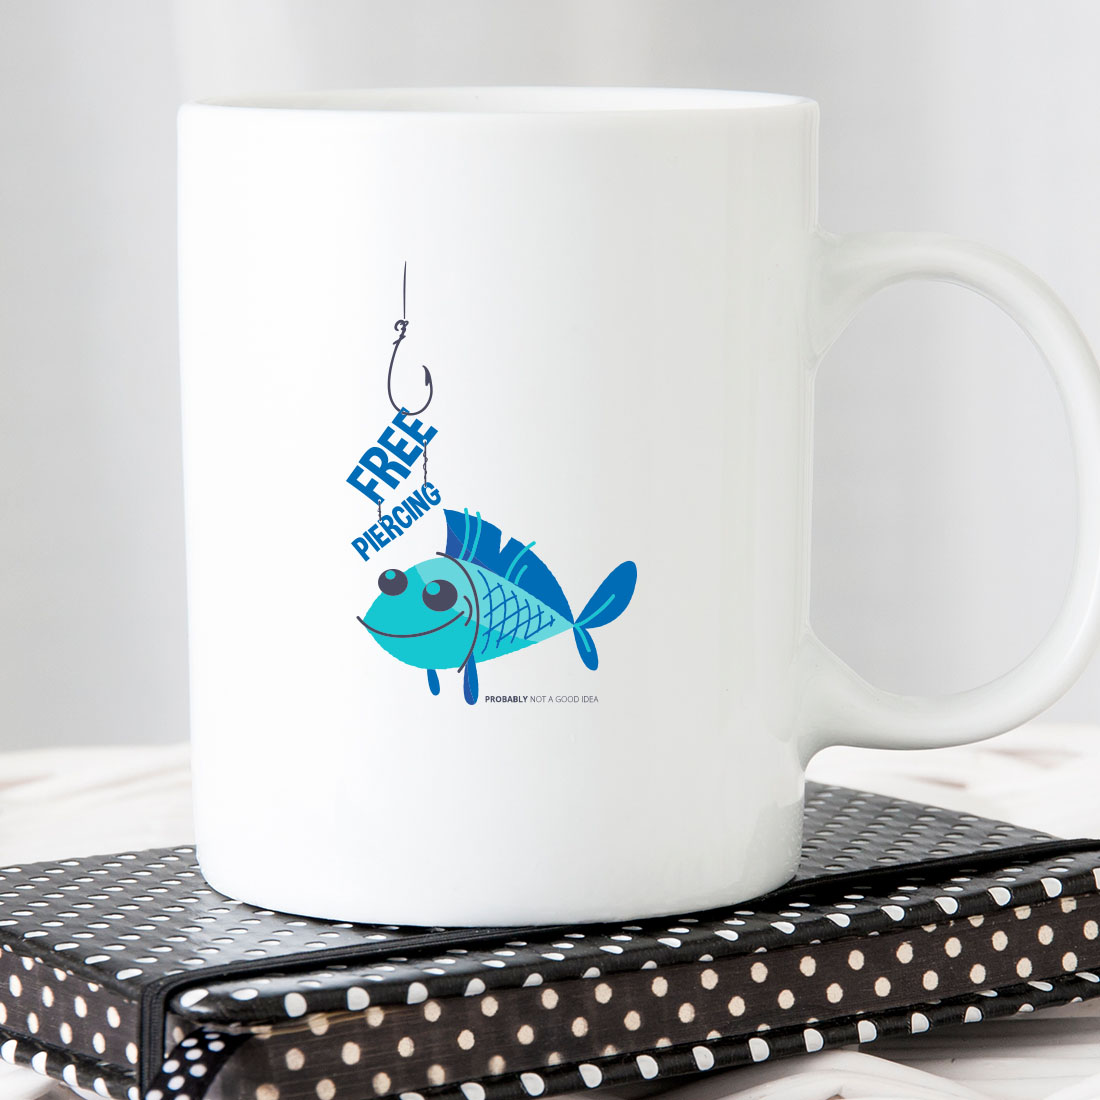 White coffee mug with a blue fish on it.